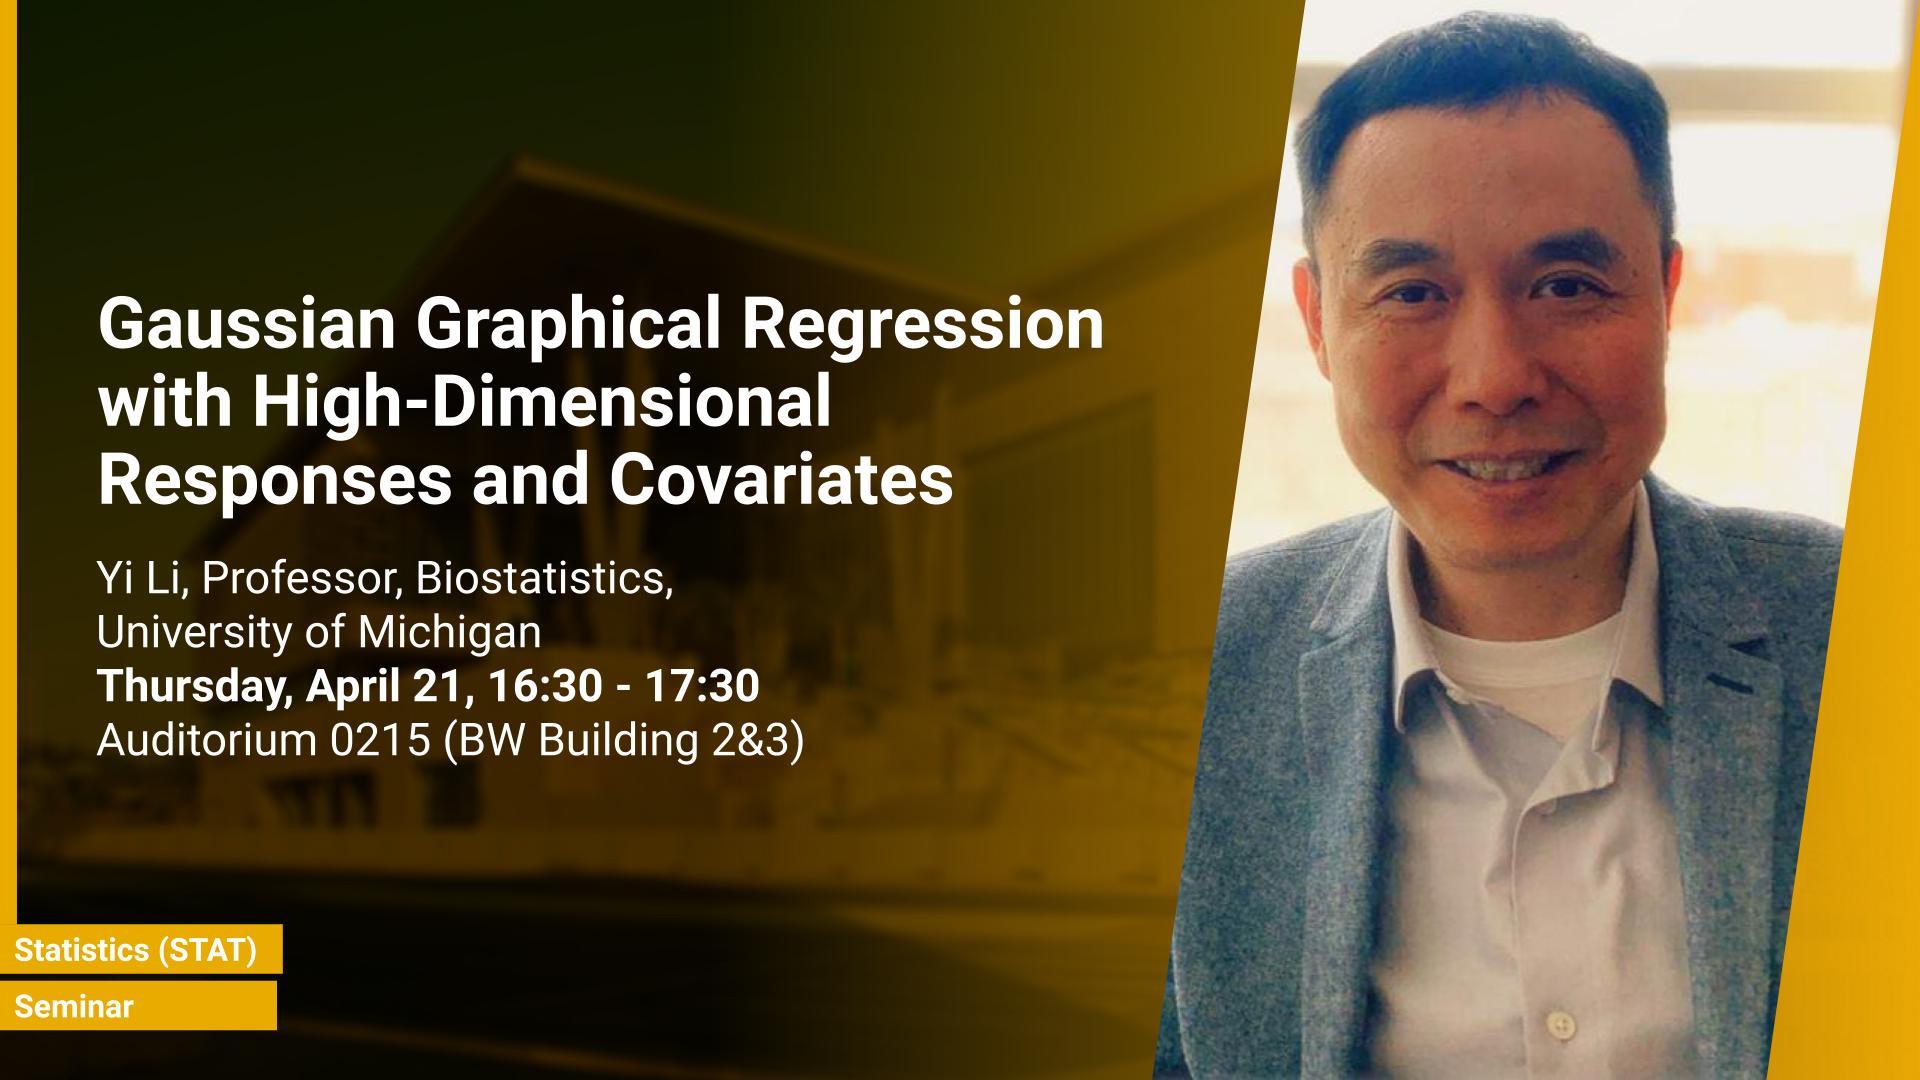 KAUST-CEMSE-STAT-Seminar-Yi Li-Gaussian Graphical Regression with High-Dimensional Responses and Covariates